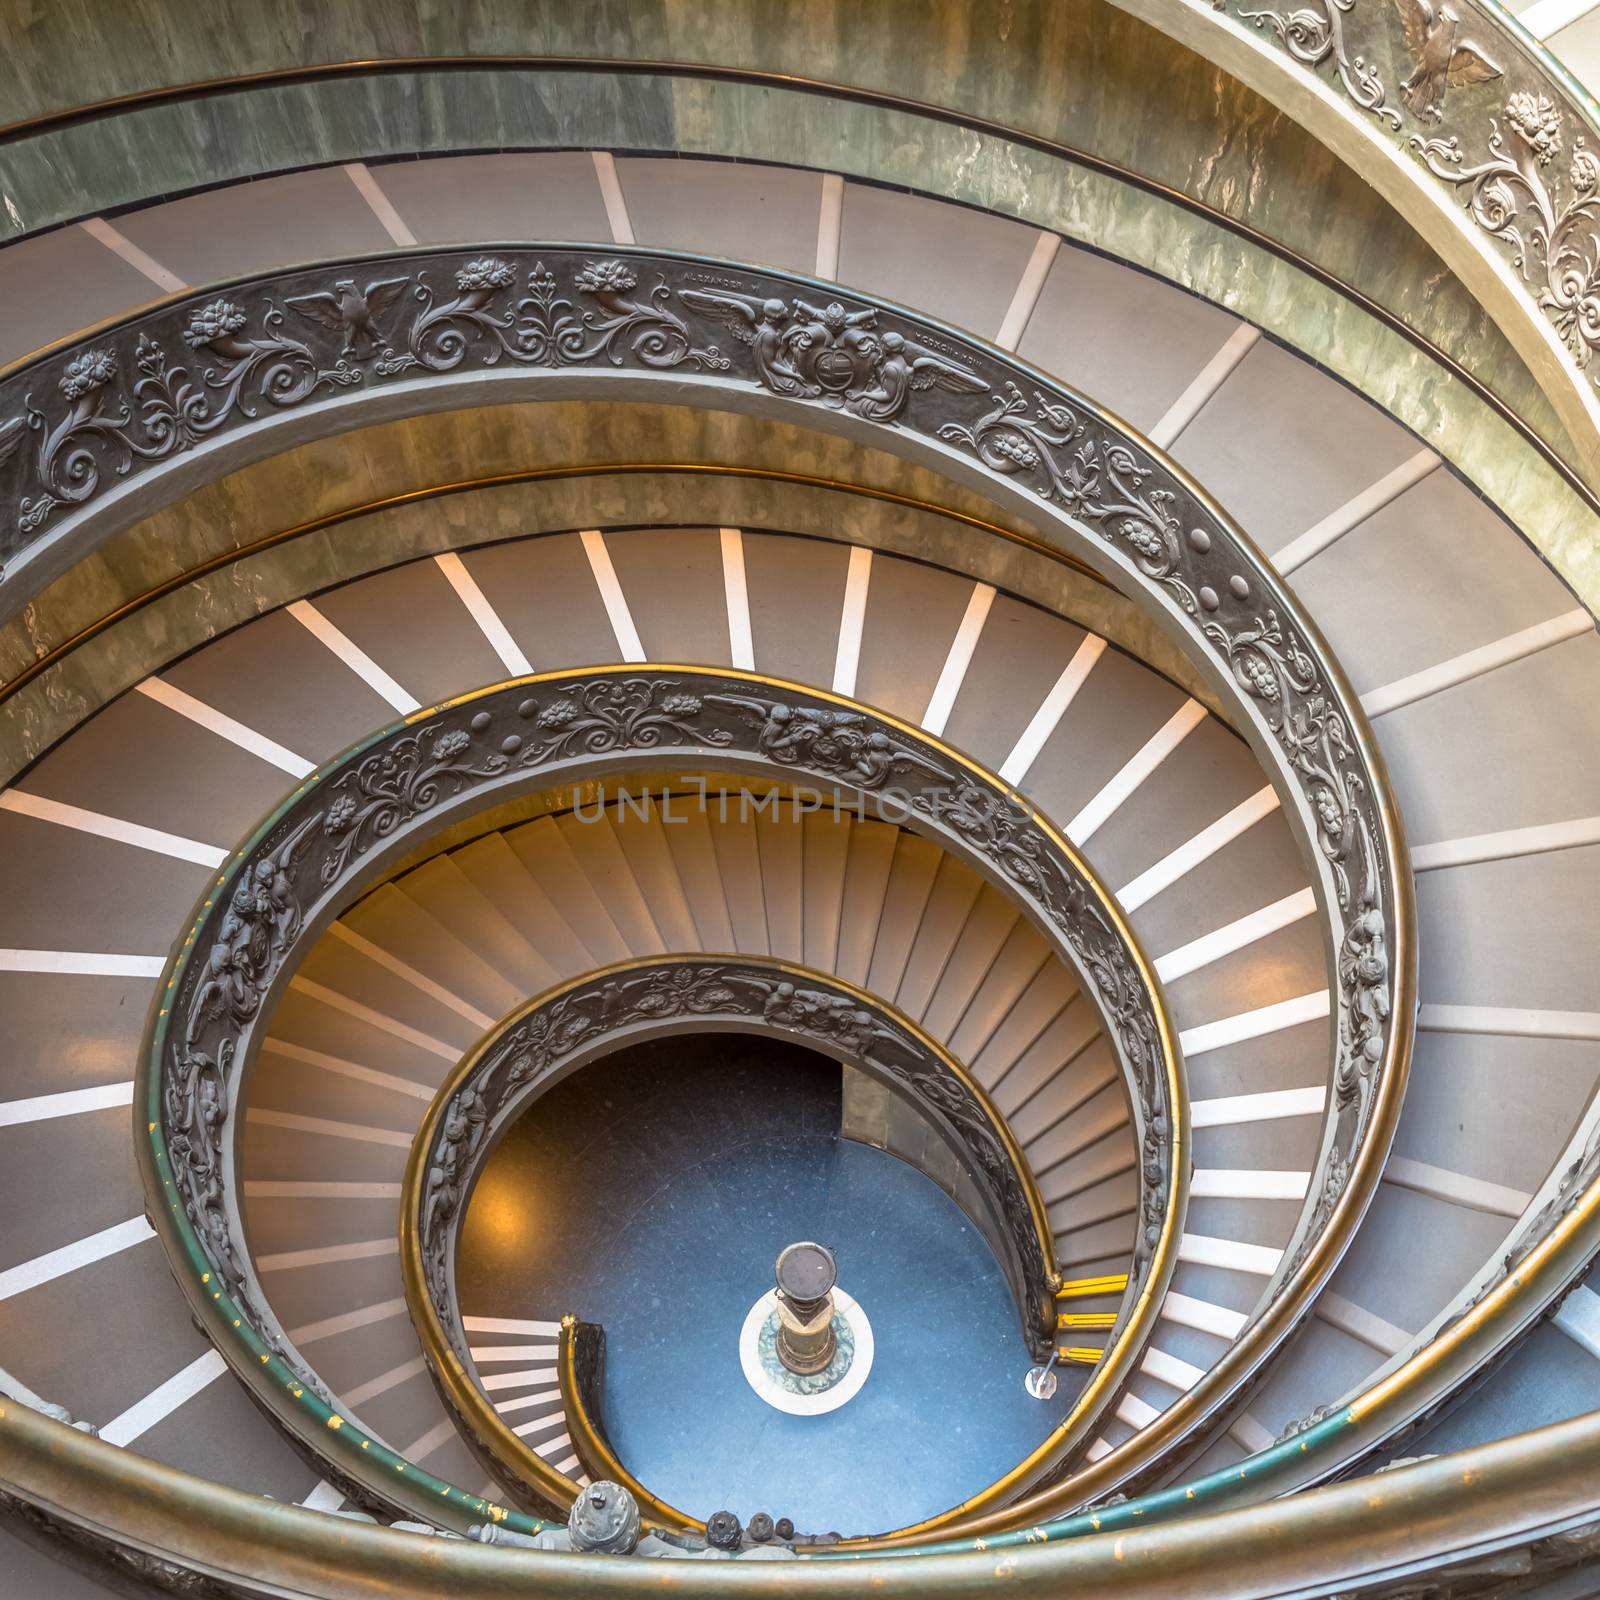 The famous spiral staircase in Vatica Museum - Rome, Italy by Perseomedusa